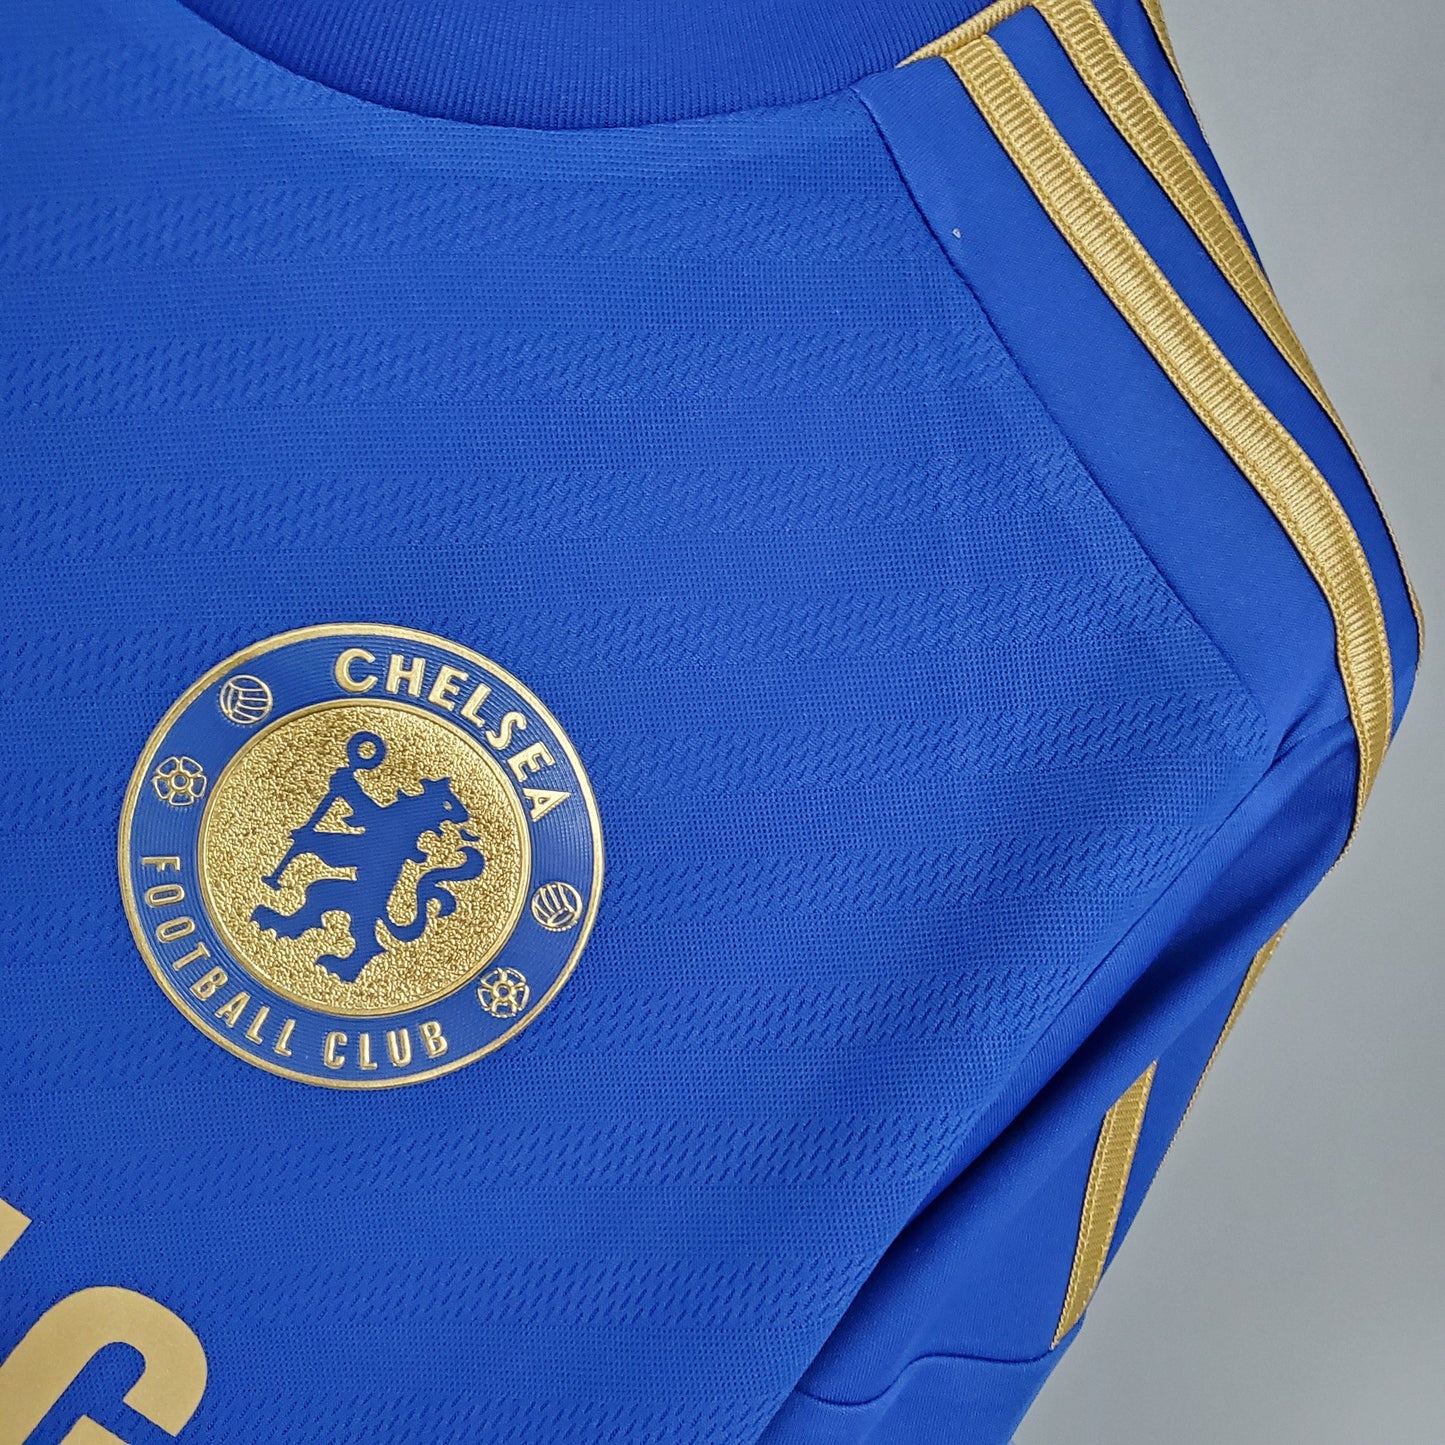 CHELSEA 2012 - 2013 HOME JERSEY